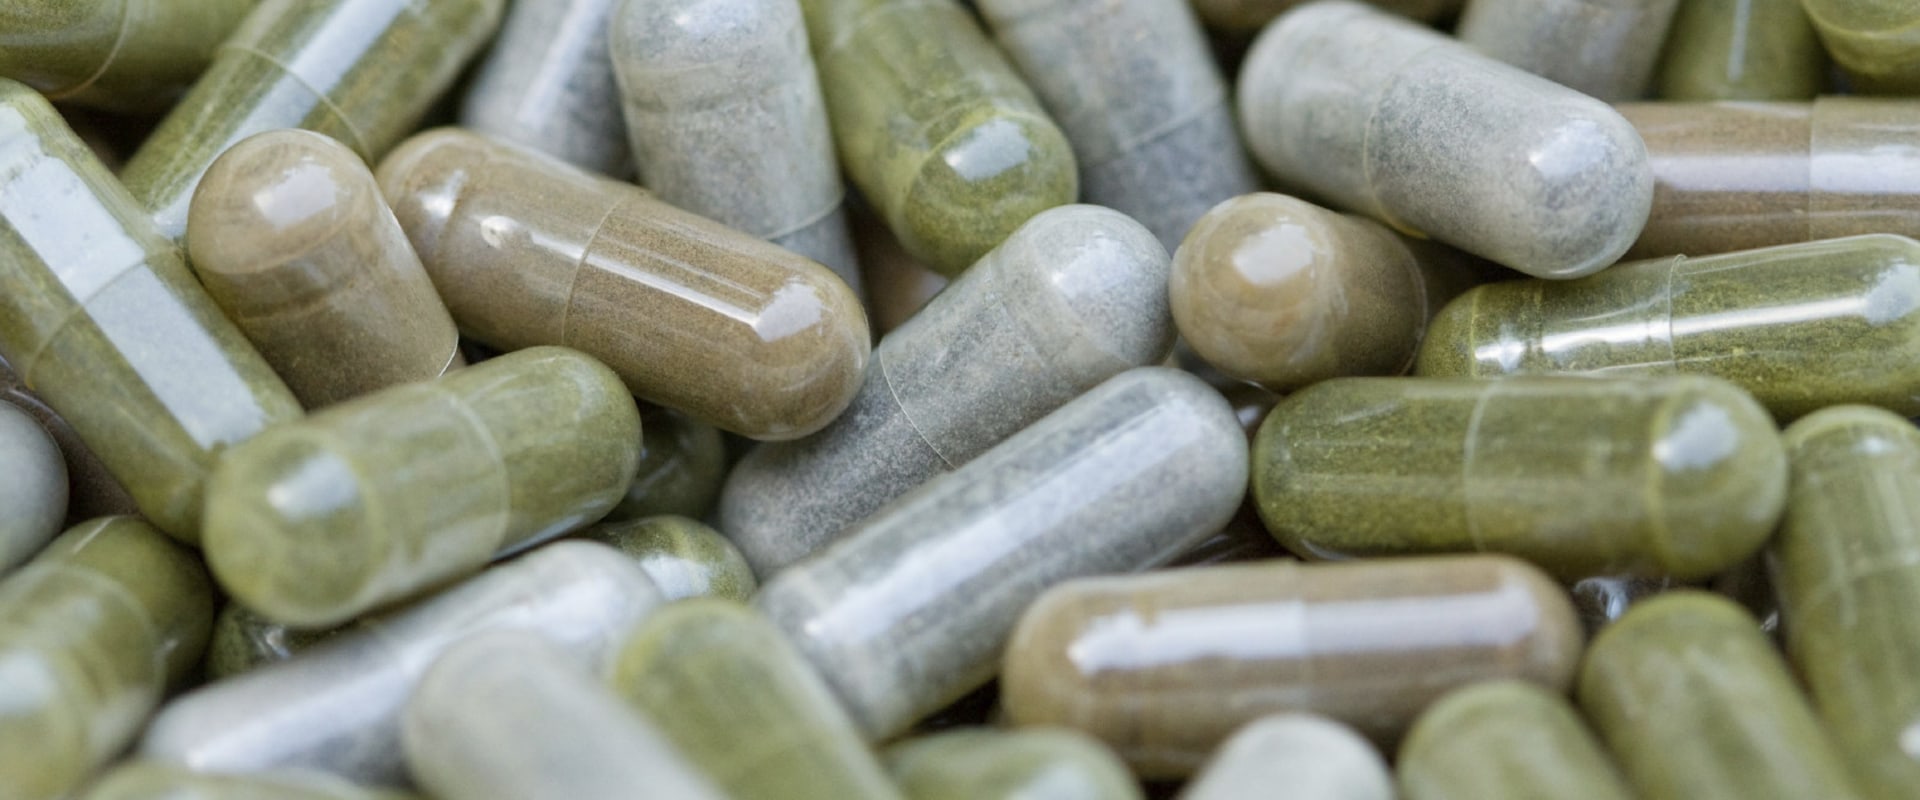 Are There Any Potential Side Effects from Taking Health Supplements?